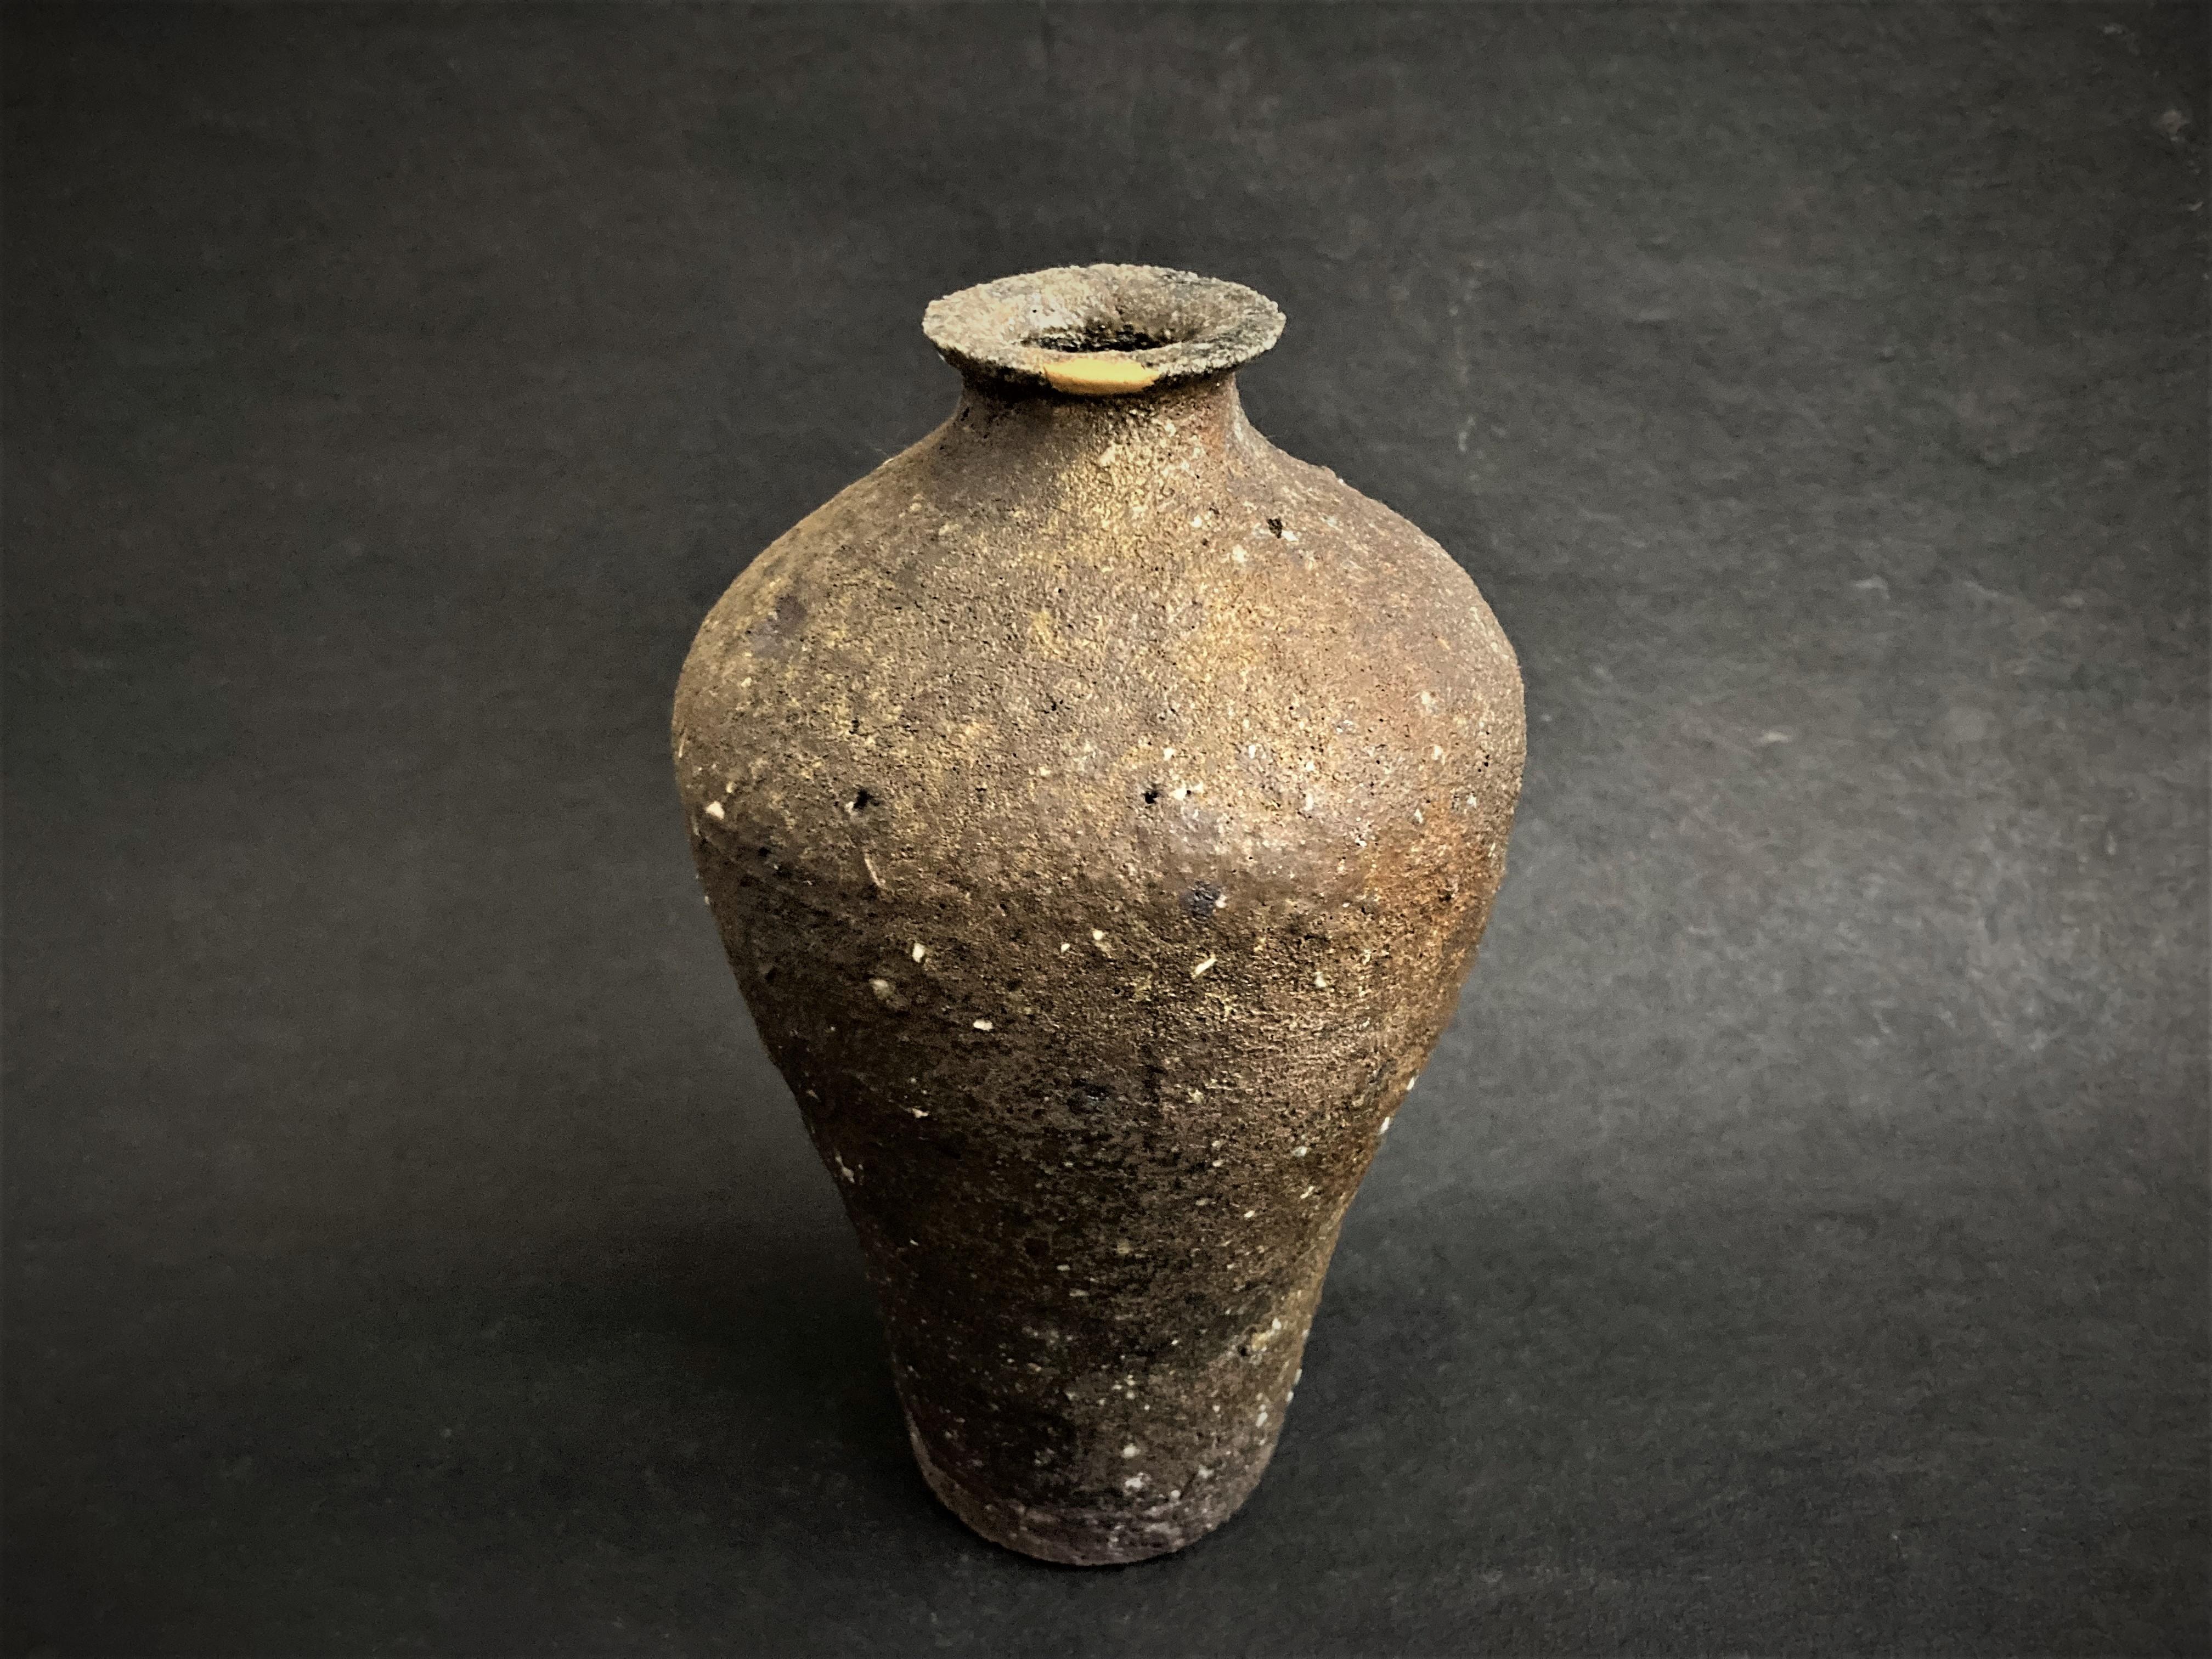 Large Unglazed Flower vase by Toru Hatta
Limited Edition of 3
Dimensions: Diameter 11 x H 20 cm
Material: Handmade Ceramic. Unglazed. 

Lead time may vary. Please contact us.


Toru Hatta was both in Kanazawa in 1977. His love of antiques and old